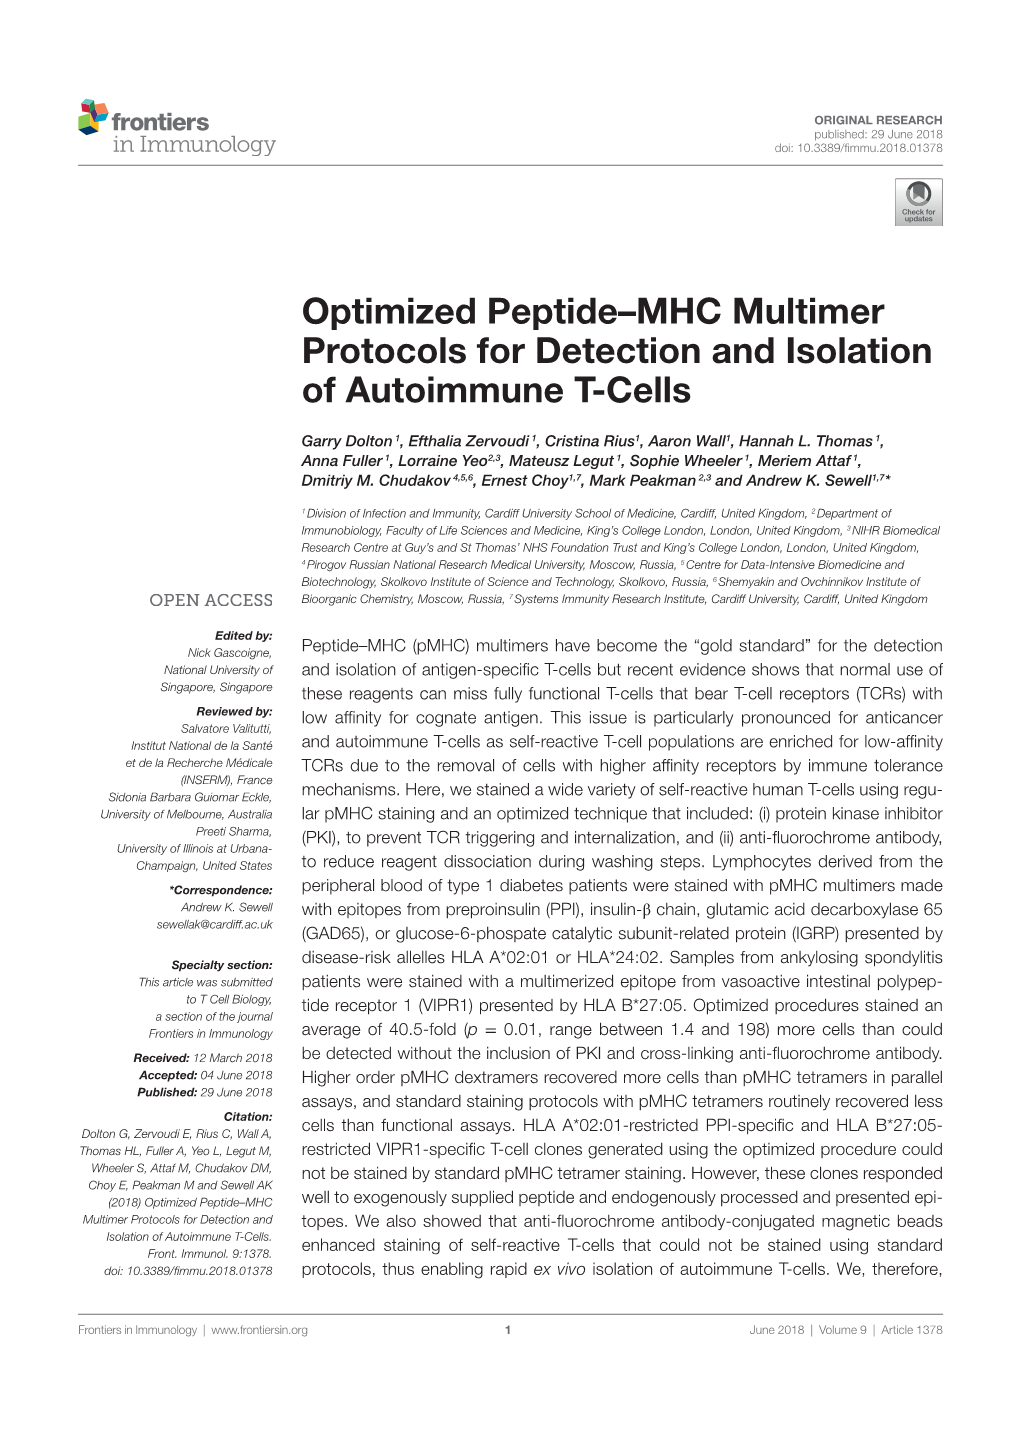 Optimized Peptide–MHC Multimer Protocols for Detection and Isolation of Autoimmune T-Cells